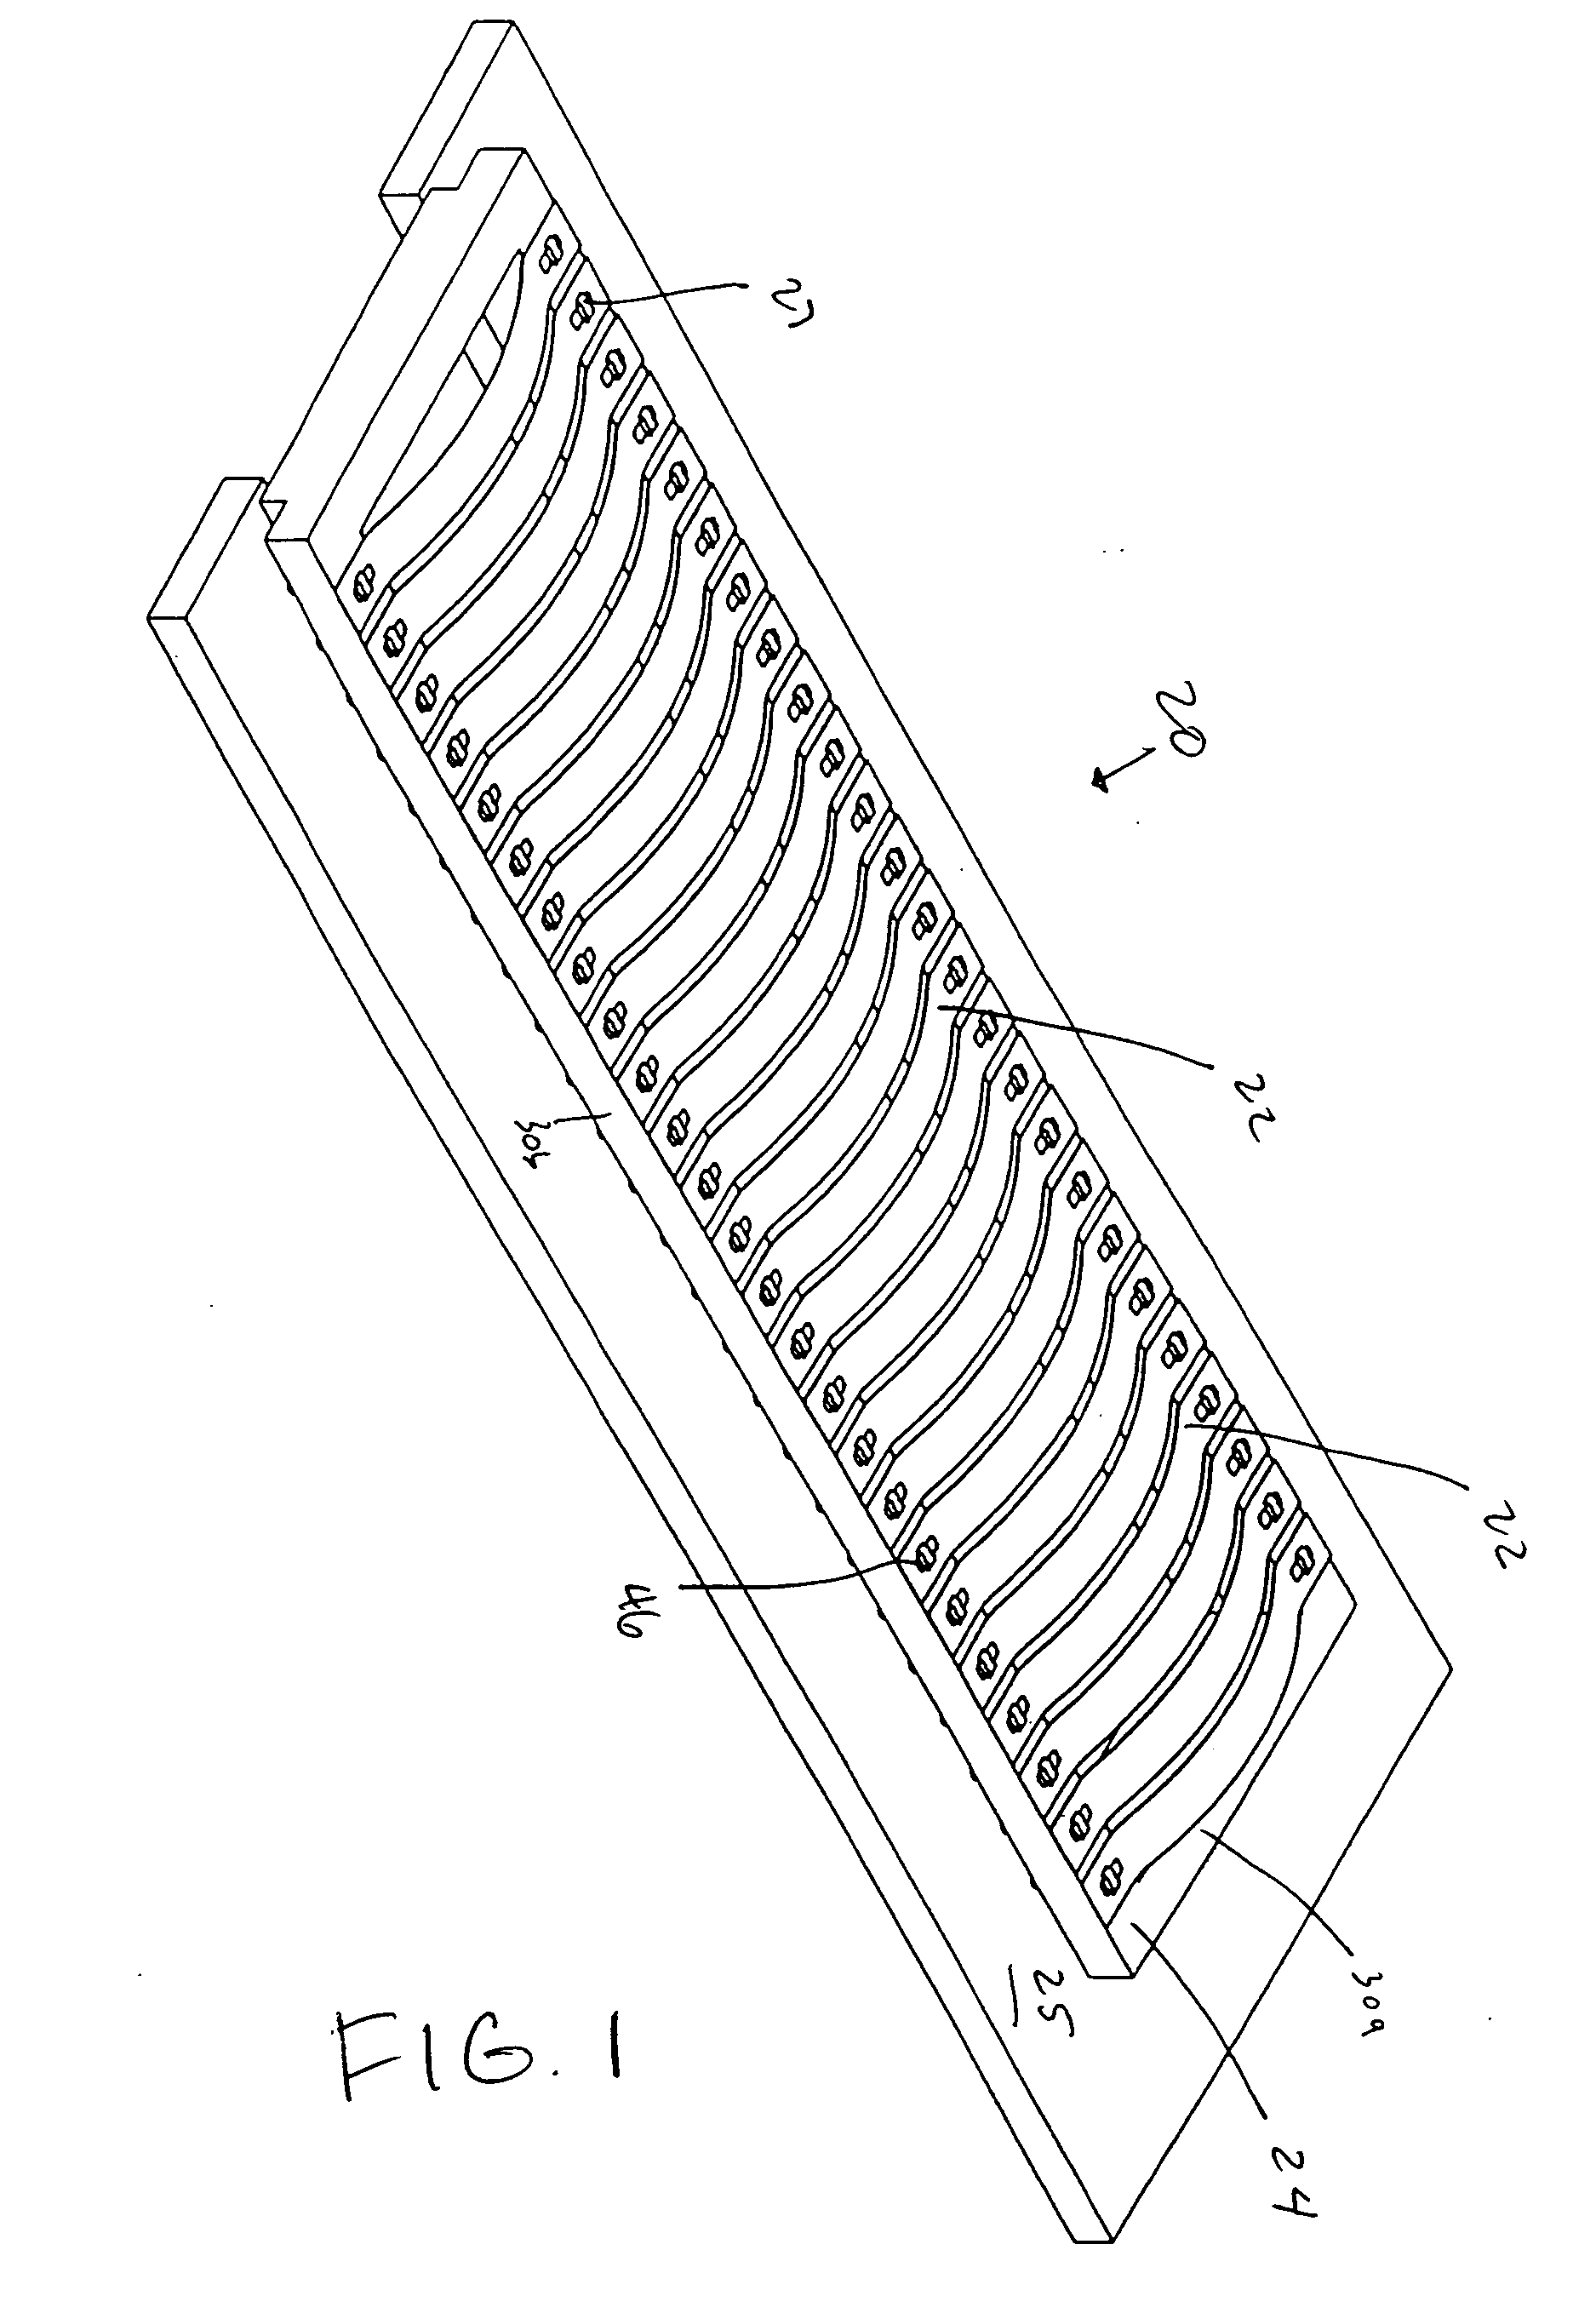 Heating element connector assembly with press-fit terminals